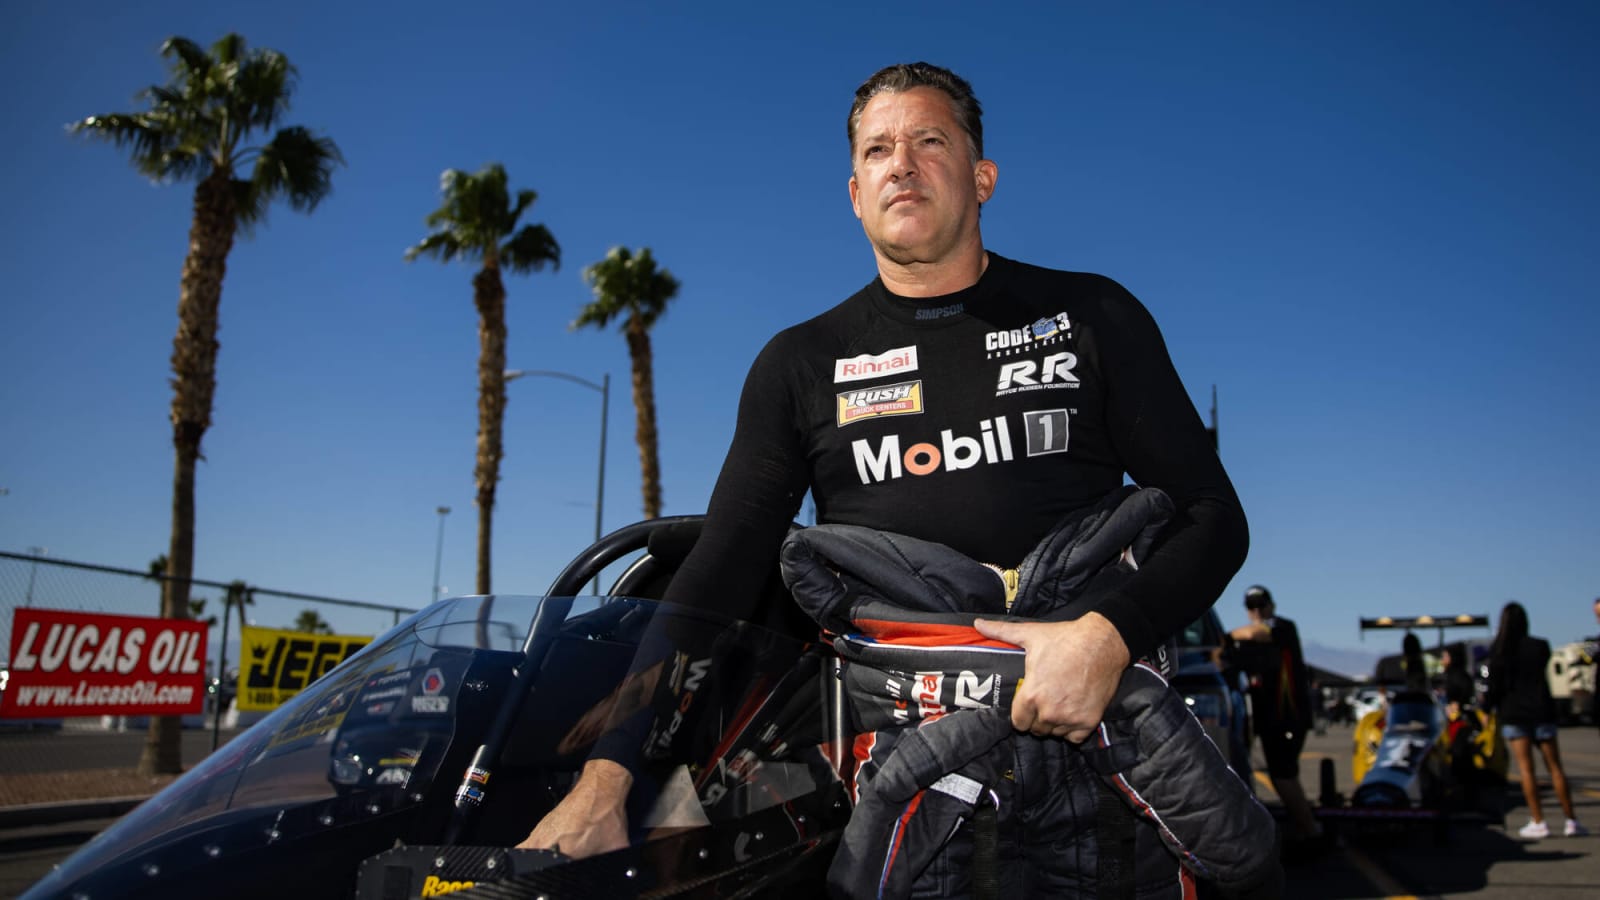 Tony Stewart claims Noah Gragson’s NASCAR suspension ‘transformed’ him into a better racer